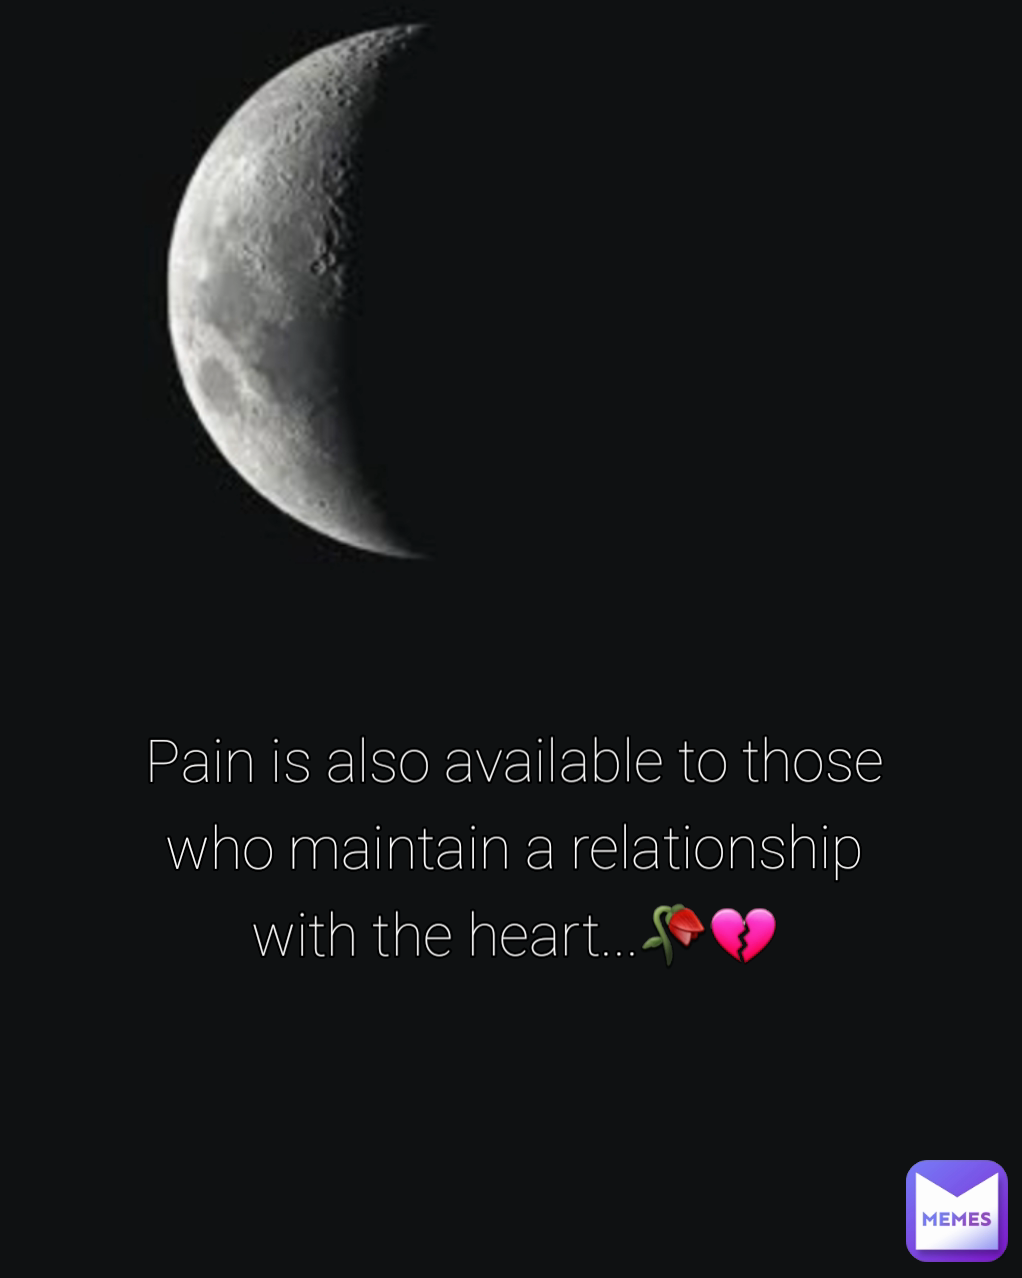 Pain is also available to those who maintain a relationship with the heart...🥀💔